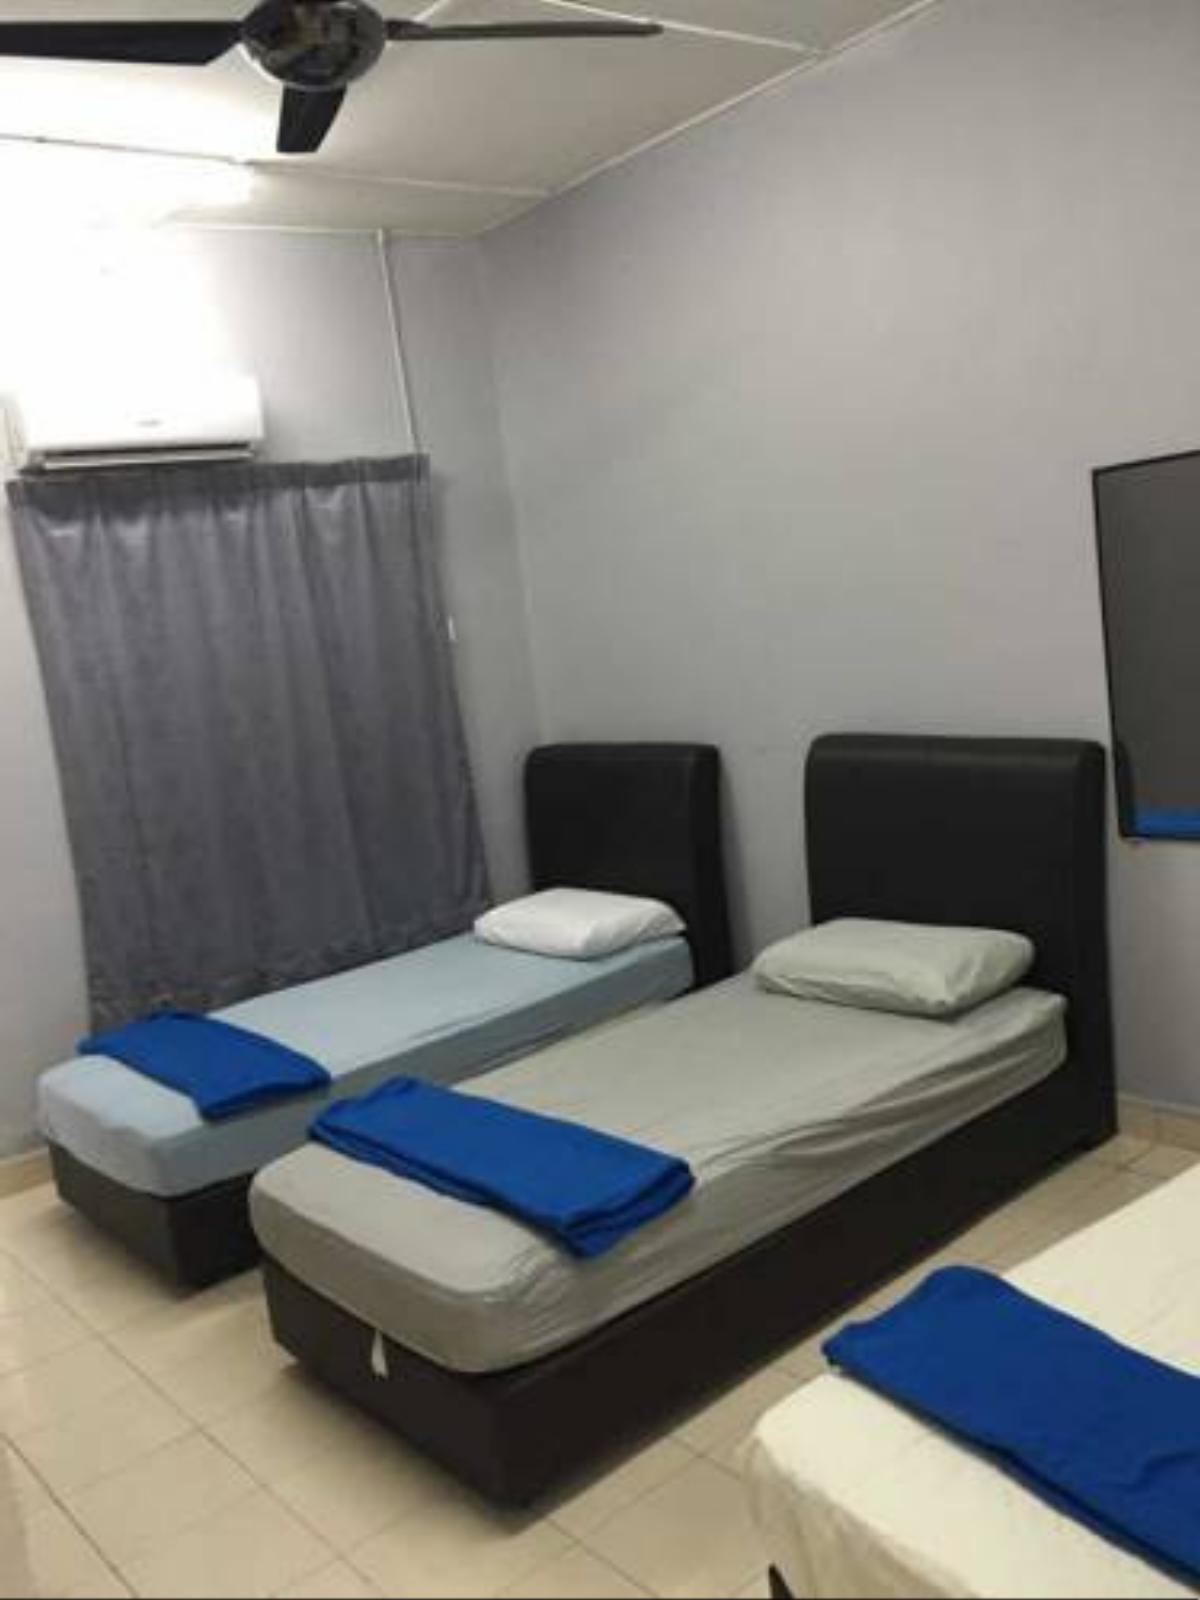 CW Guest House 18Pax Hotel Klang Malaysia